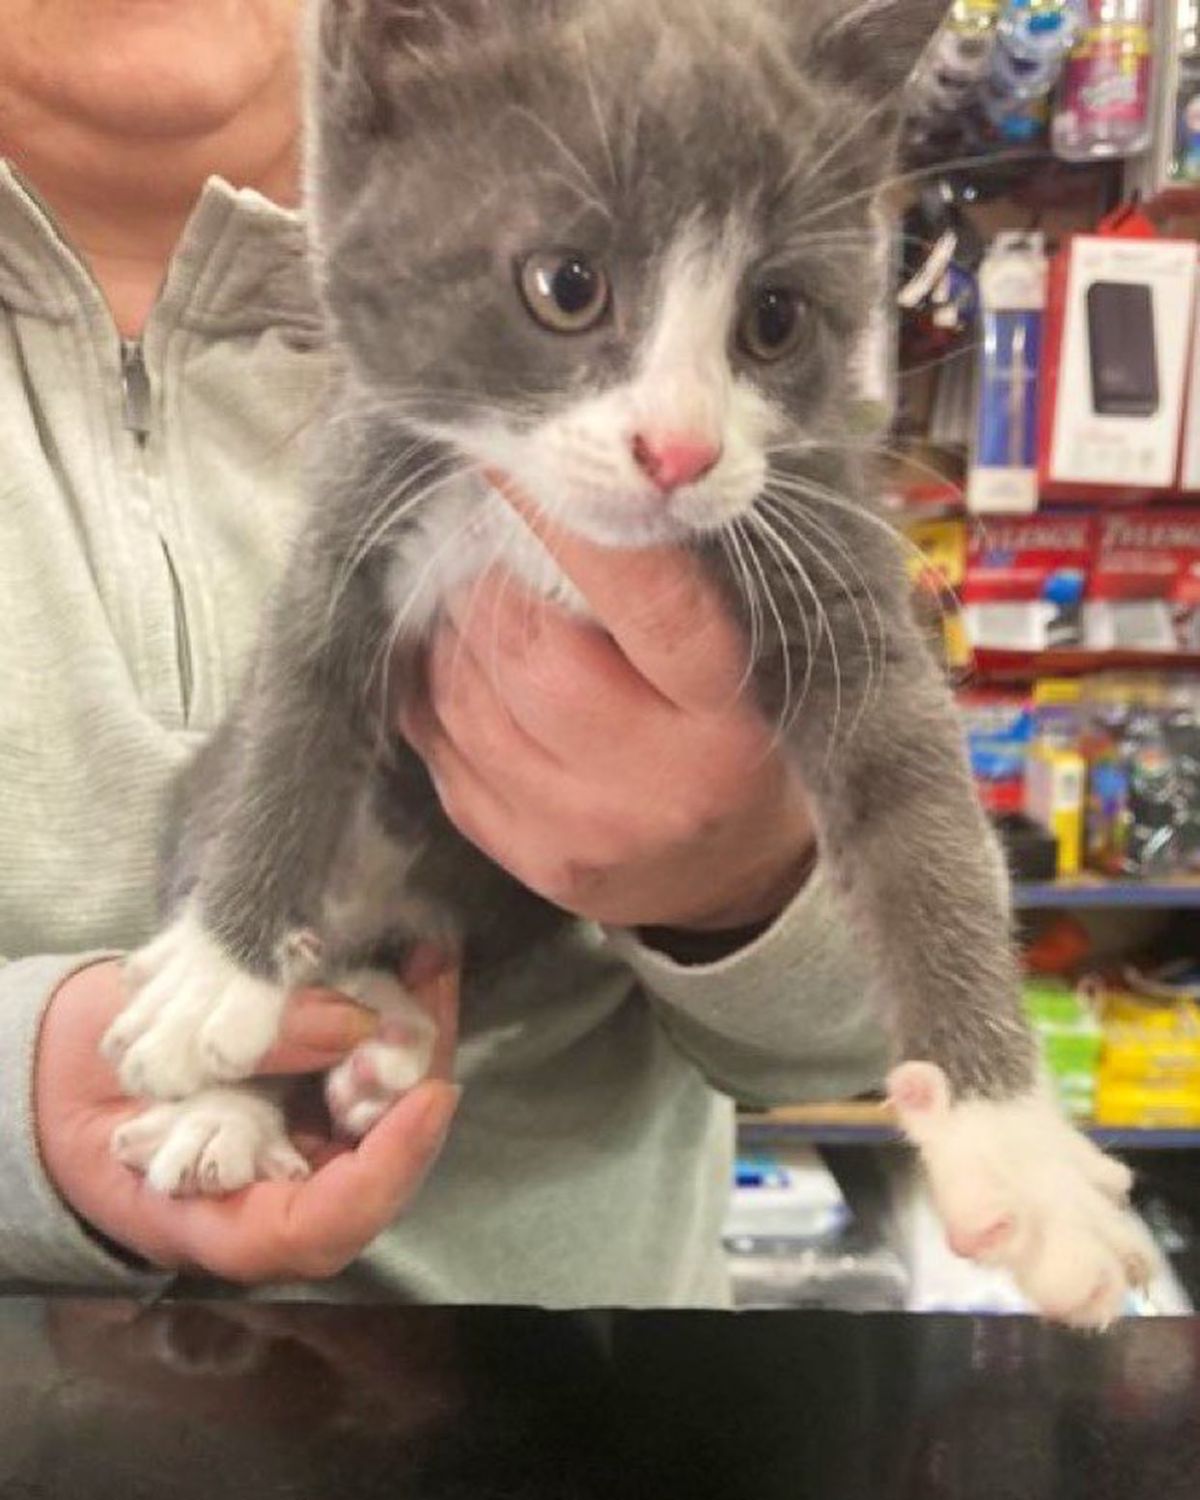 grey and white kitten being held by someone in a store